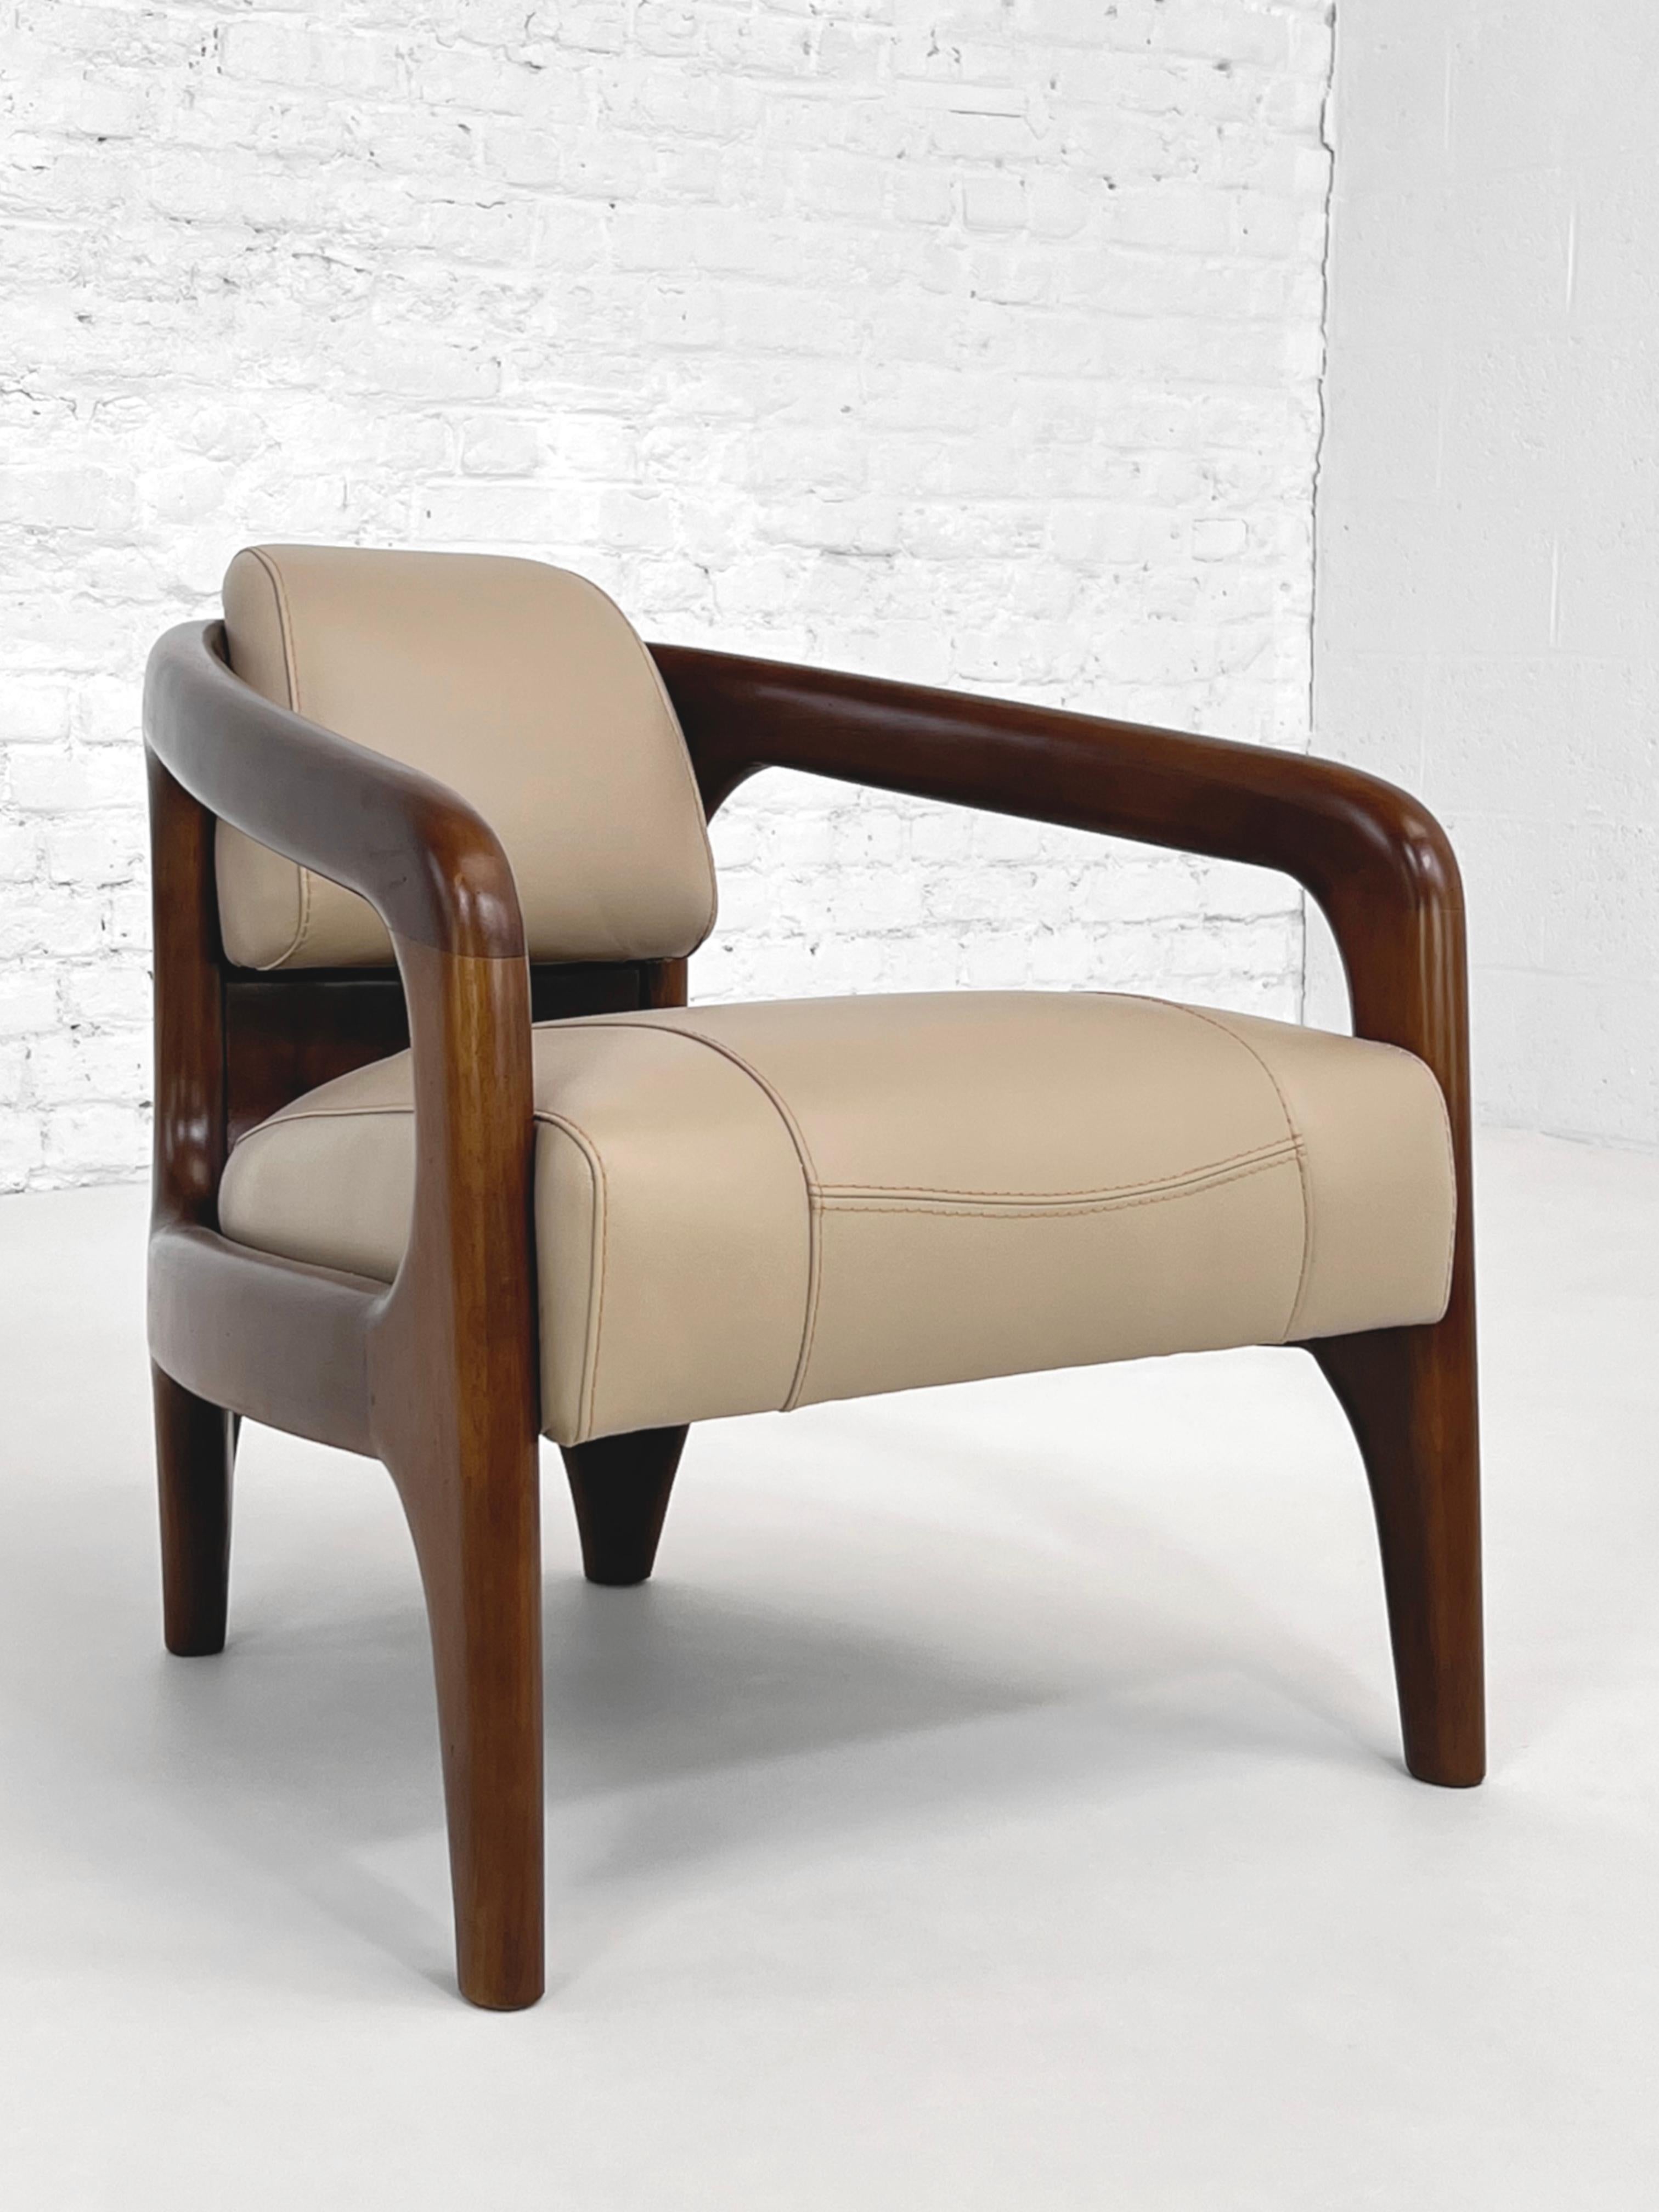 Contemporary Art Deco Design and Scandinavian Style Wooden and Leather Armchair For Sale